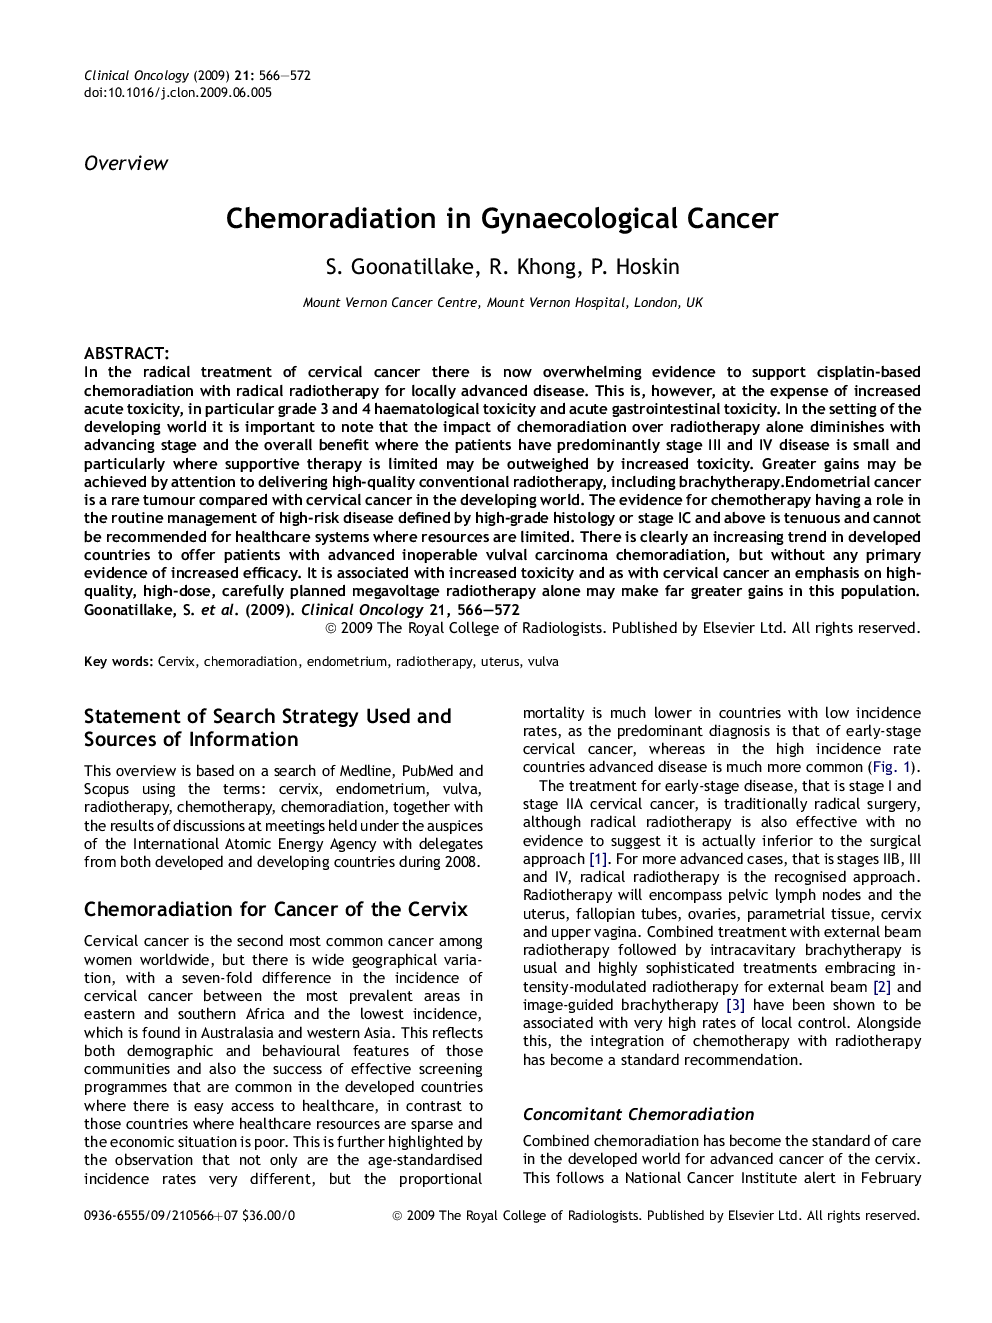 Chemoradiation in Gynaecological Cancer